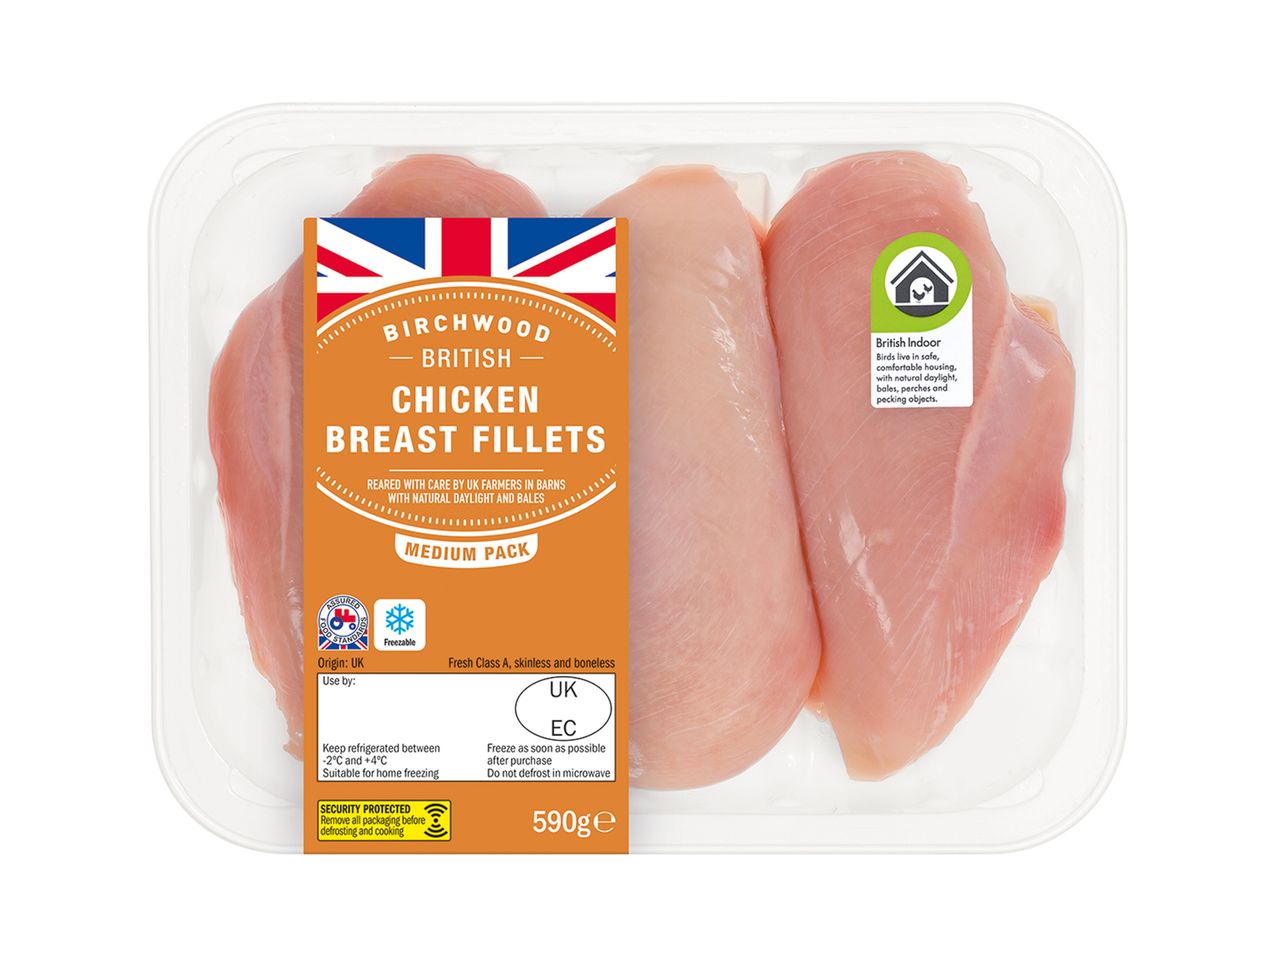 Go to full screen view: Birchwood Chicken Breast Fillets 650g - Image 1